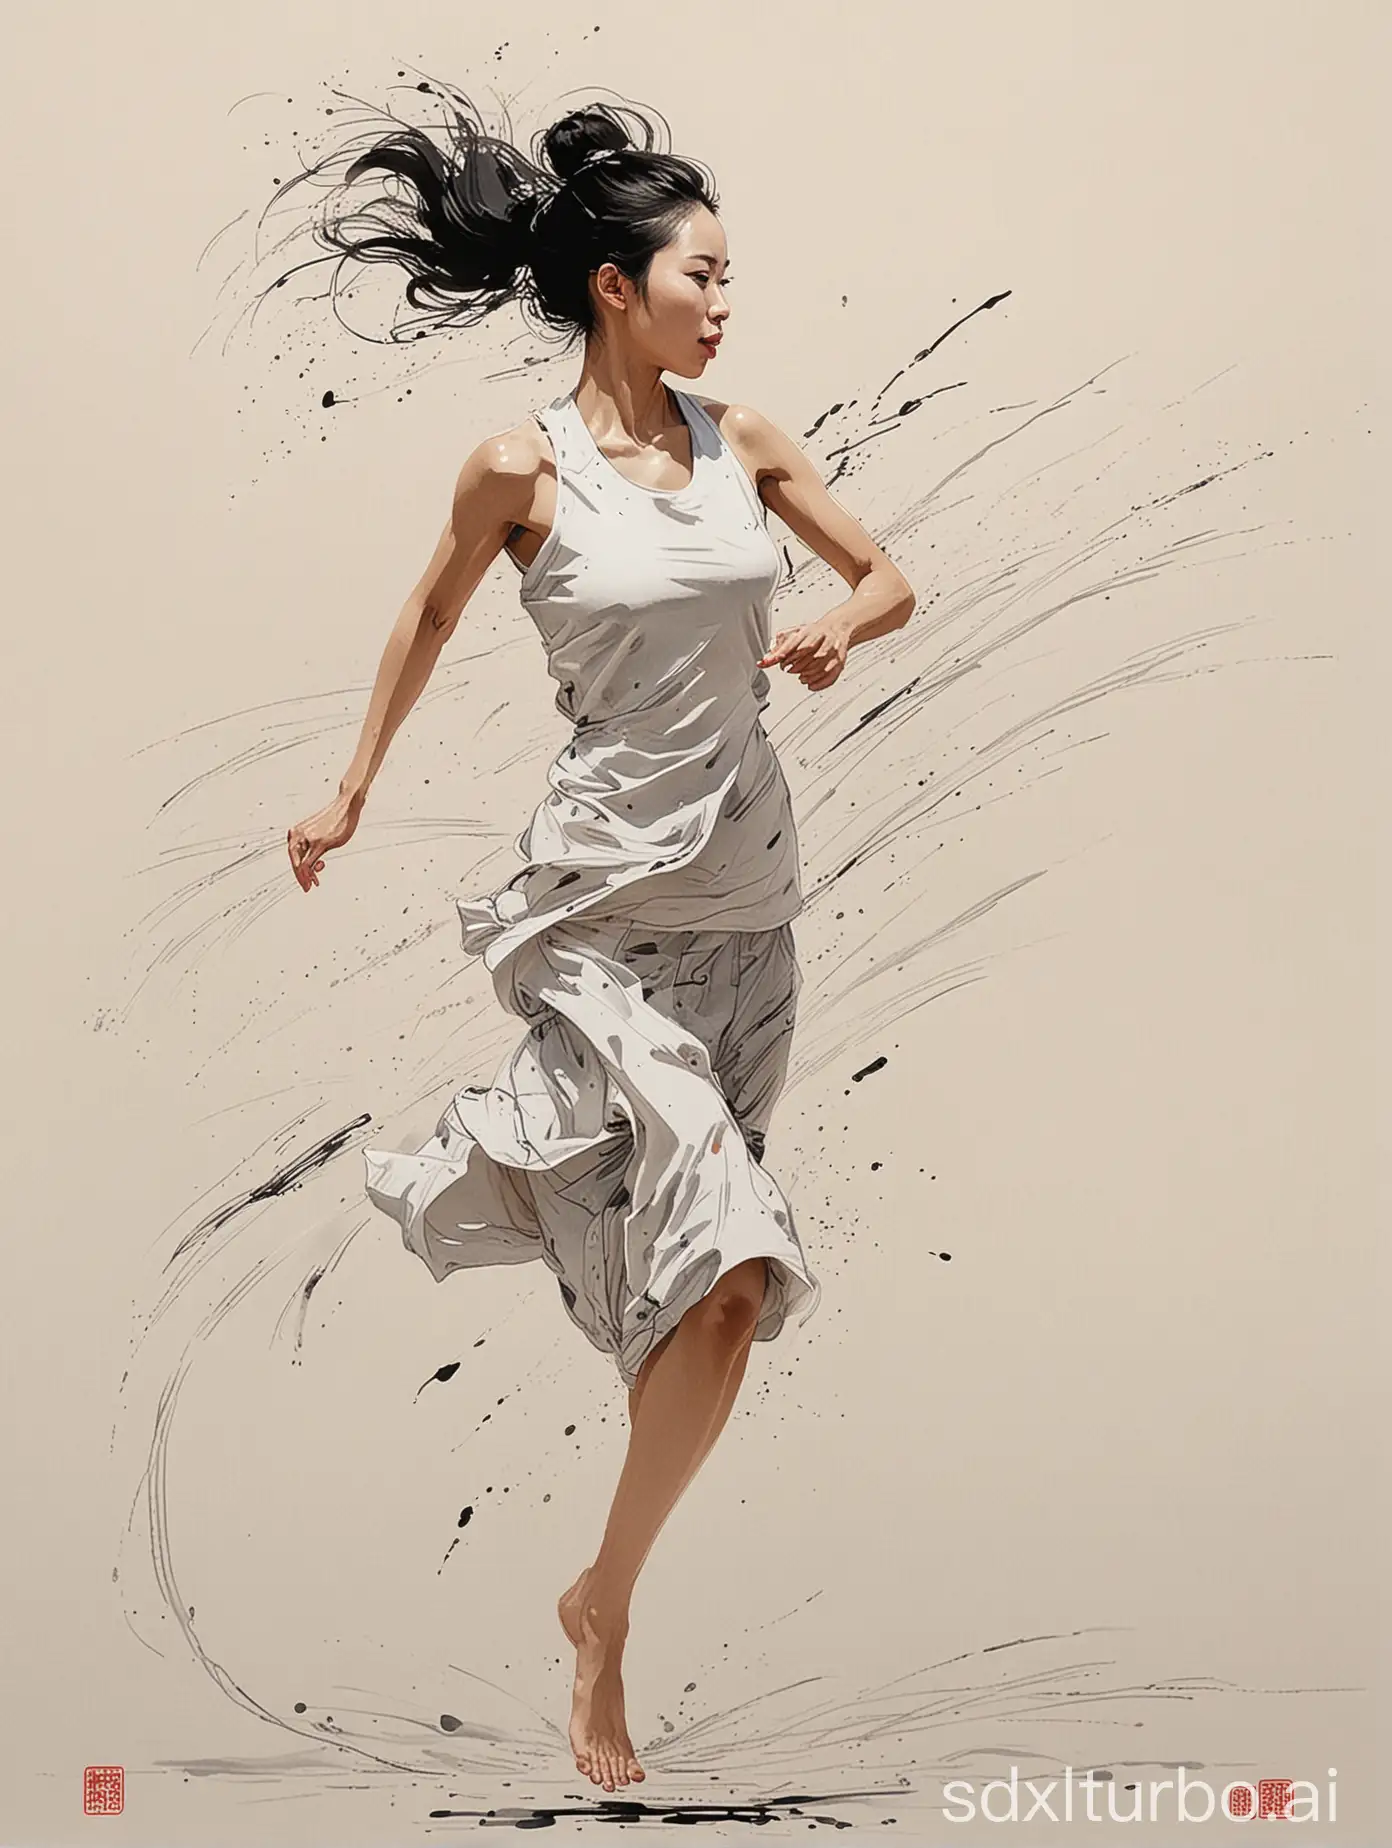 Energetic-Solo-Runner-Abstract-Wu-Guanzhong-Style-Painting